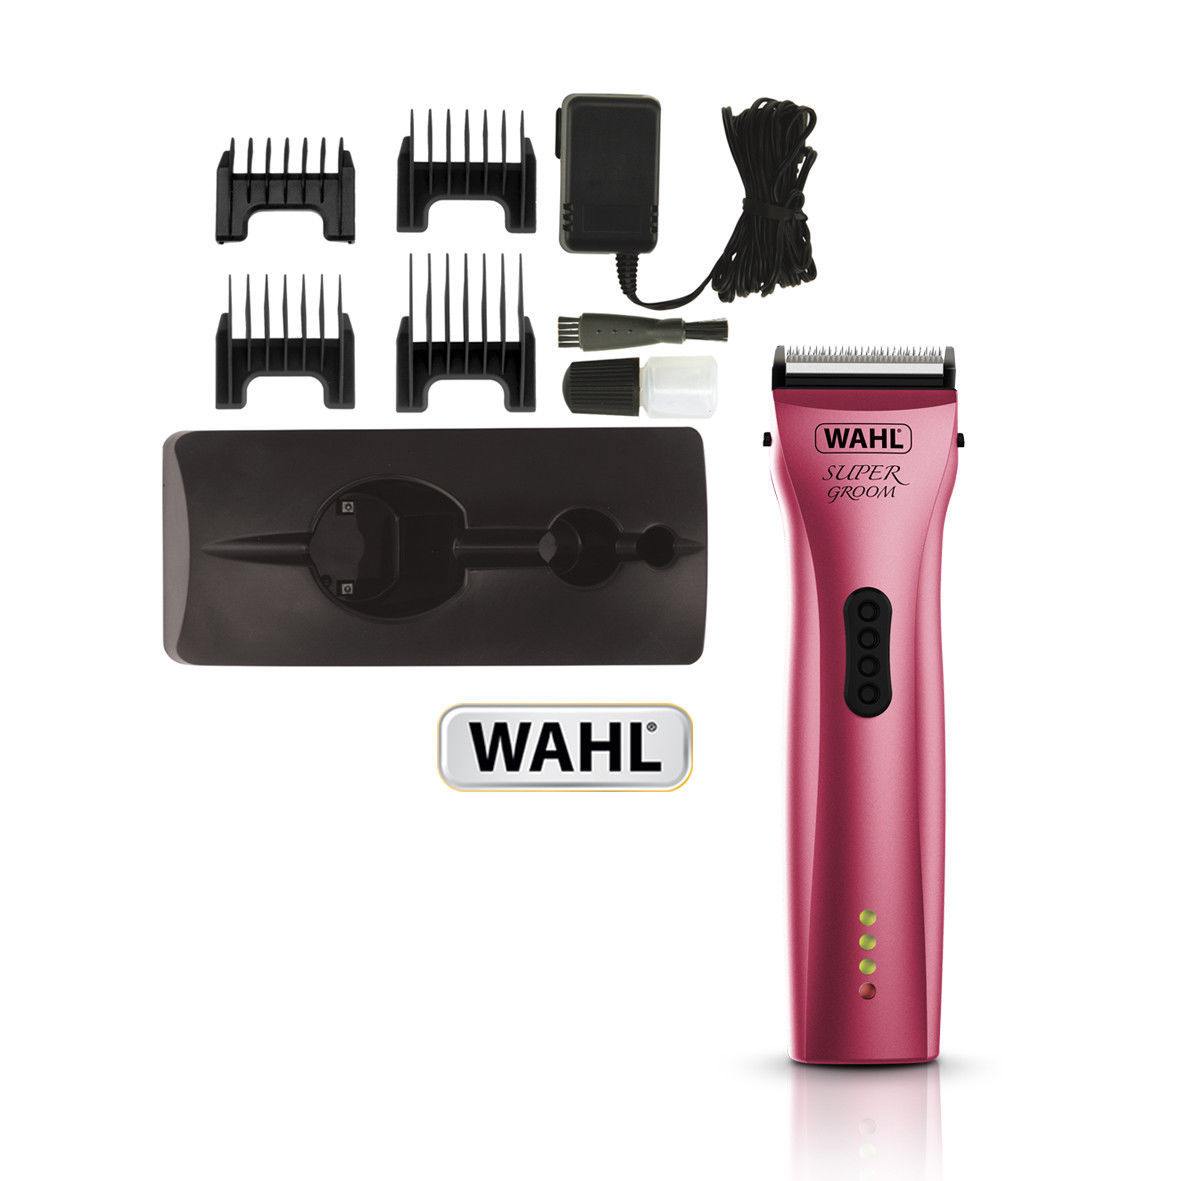 wahl livestock clippers